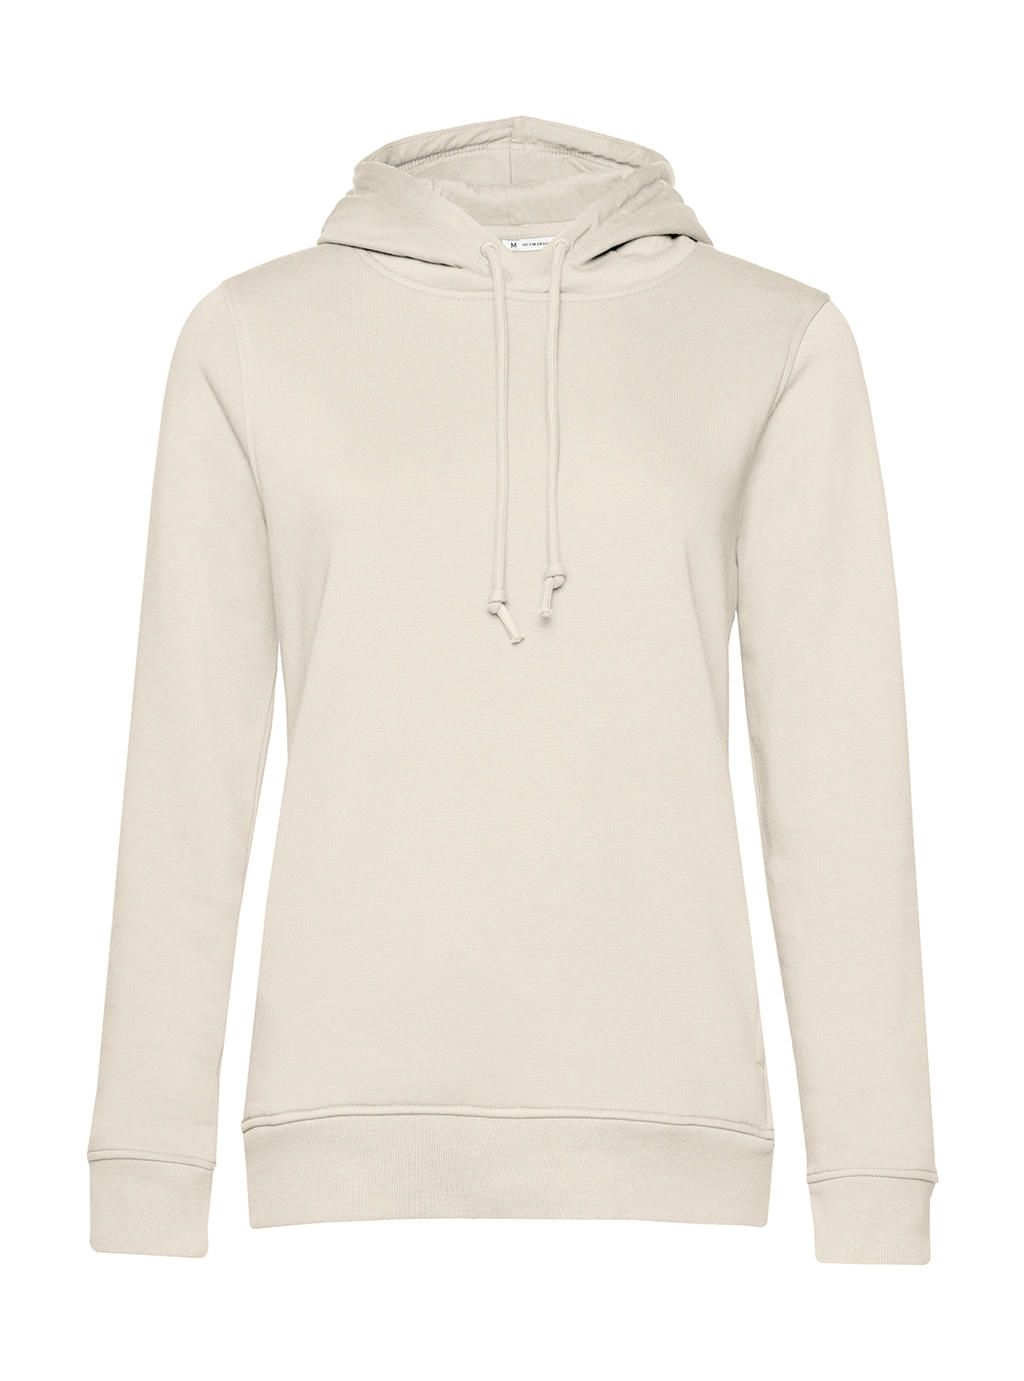  Organic Inspire Hooded /women_? in Farbe Off White